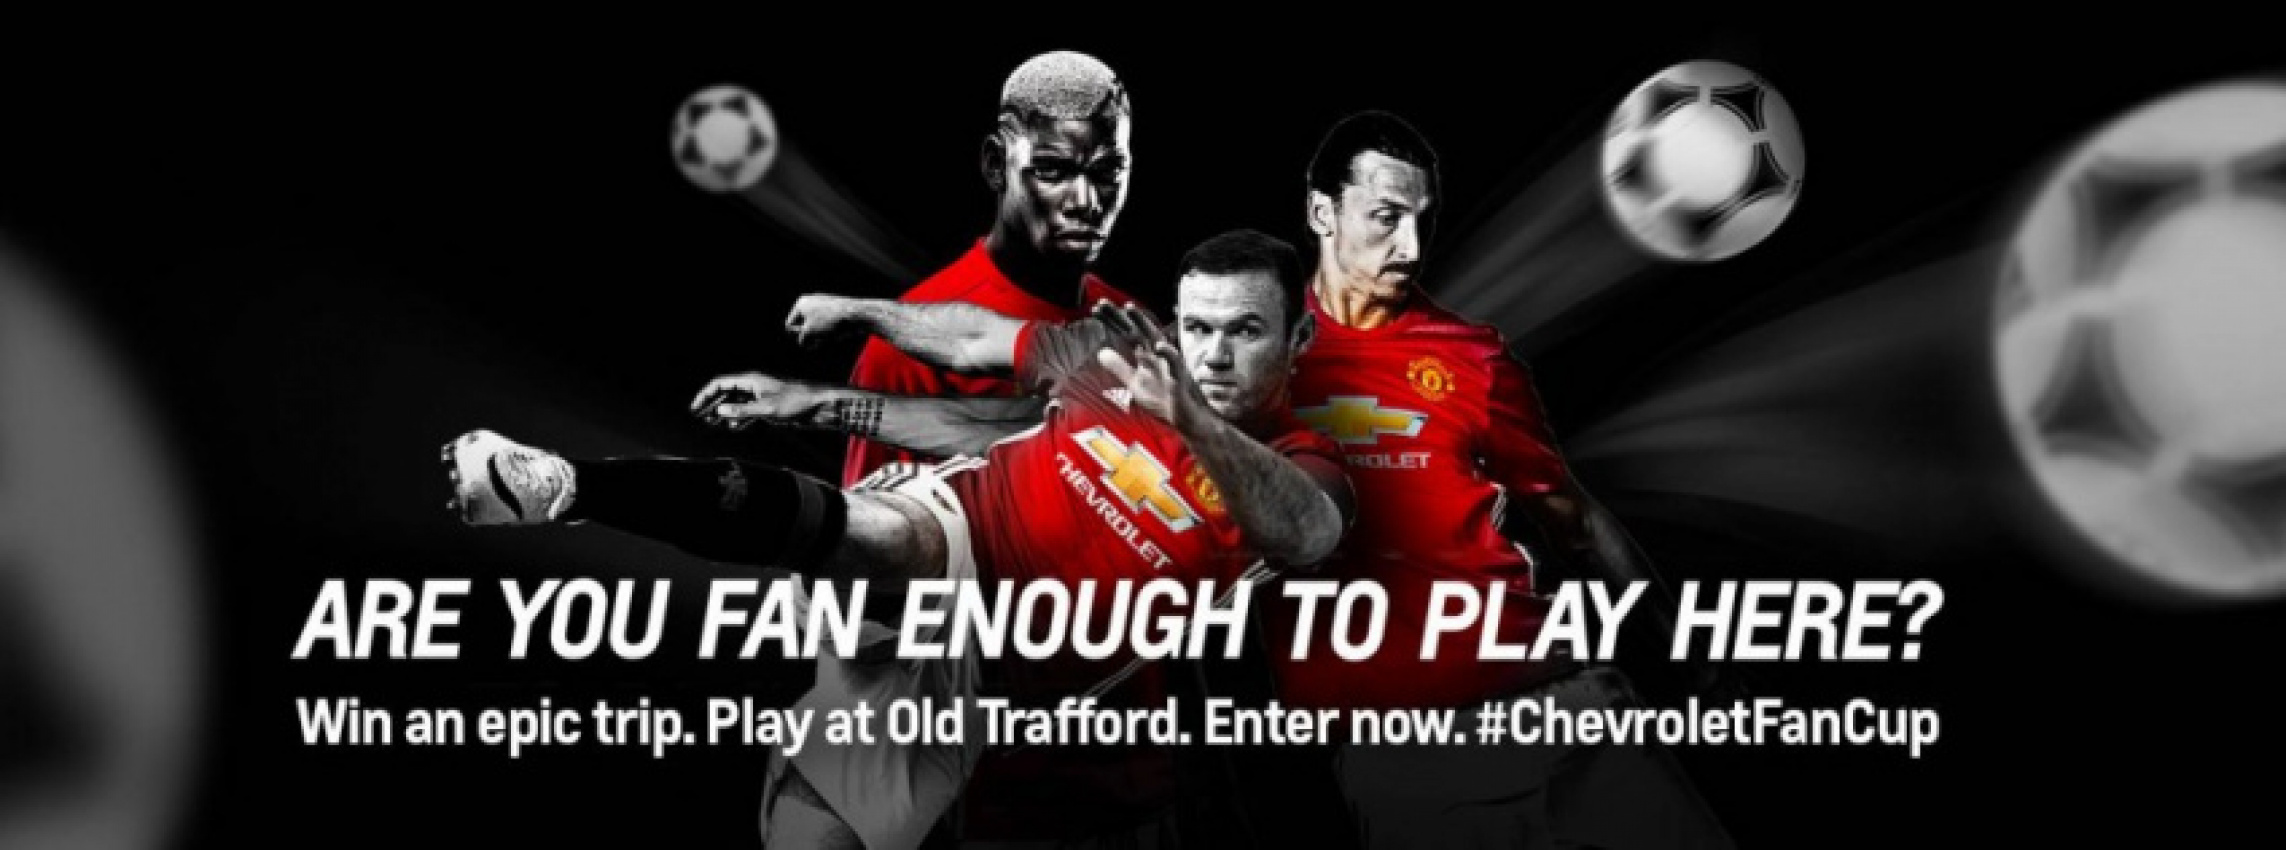 autos, cars, chevrolet, ford, autos chevrolet, chevrolet calling out mu fans for a chance to play at old trafford!